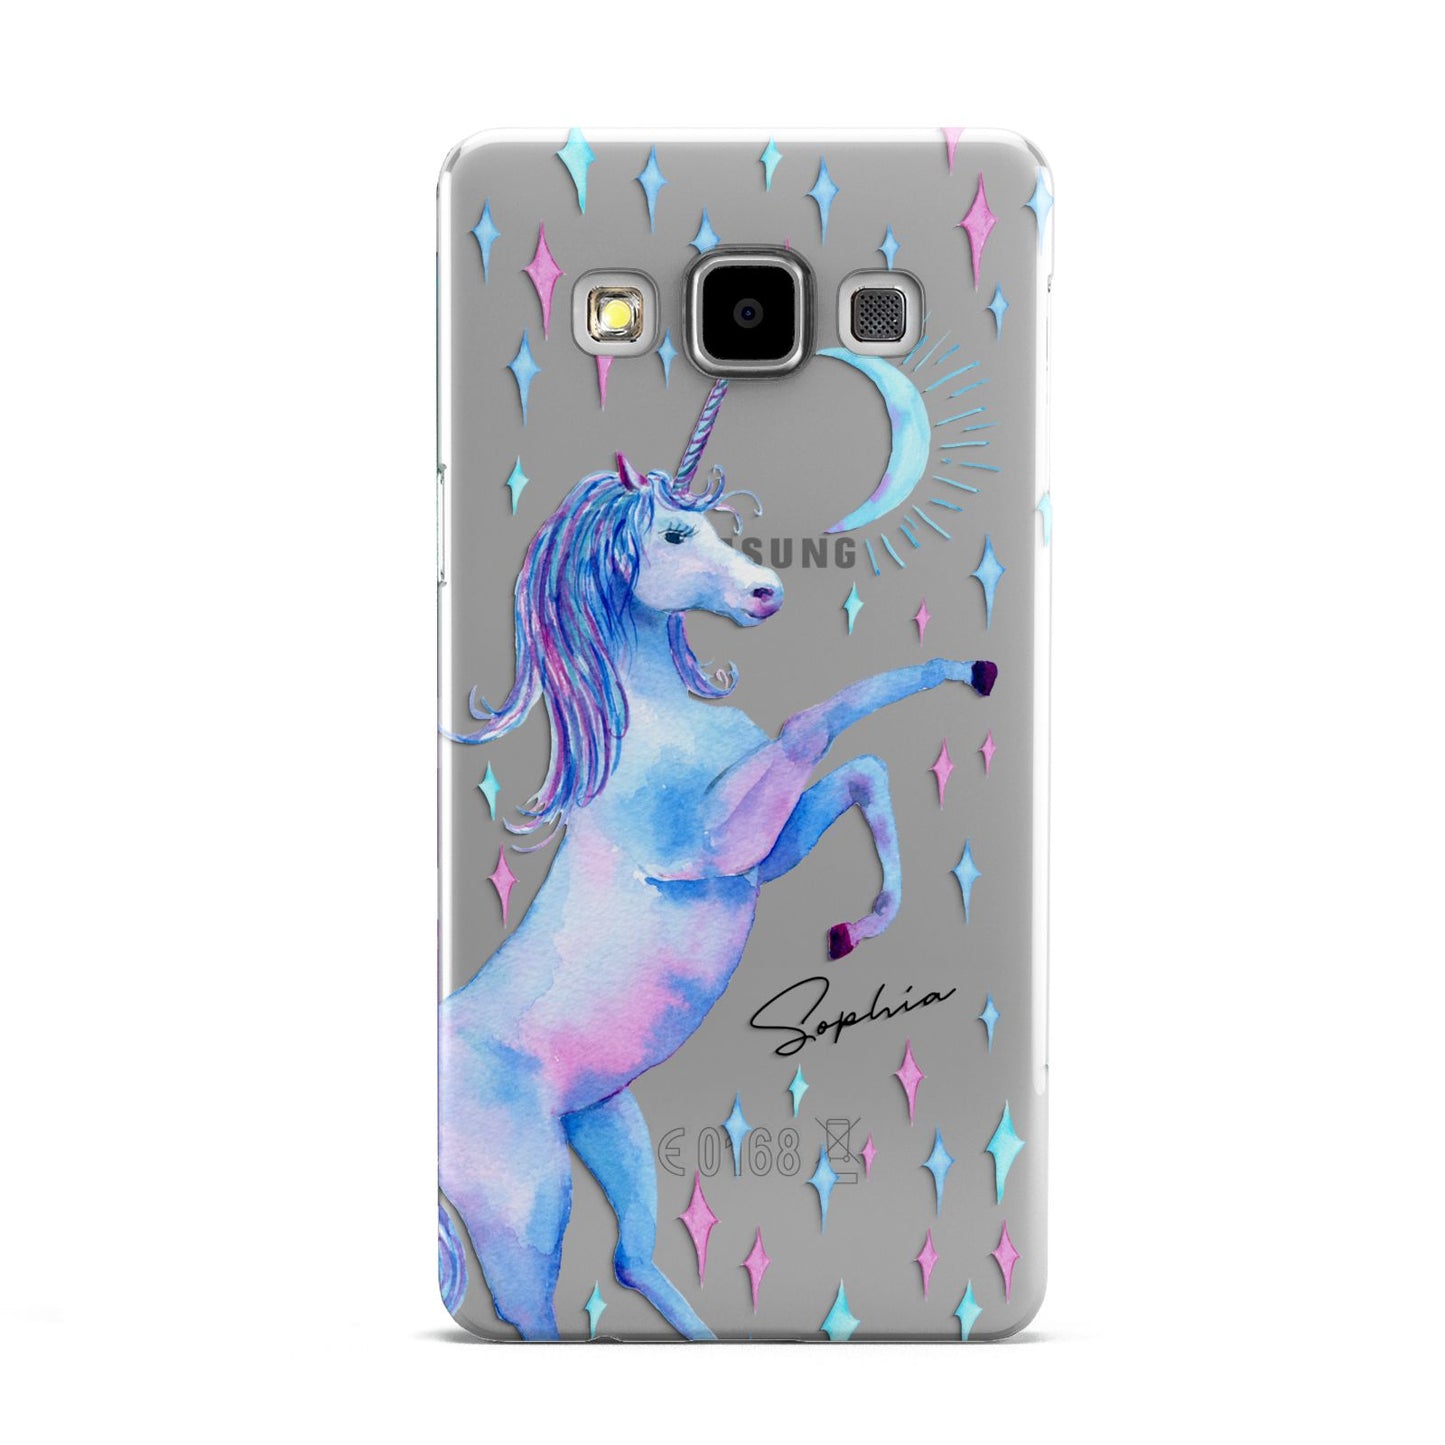 Personalised Unicorn Name Samsung Galaxy A5 Case